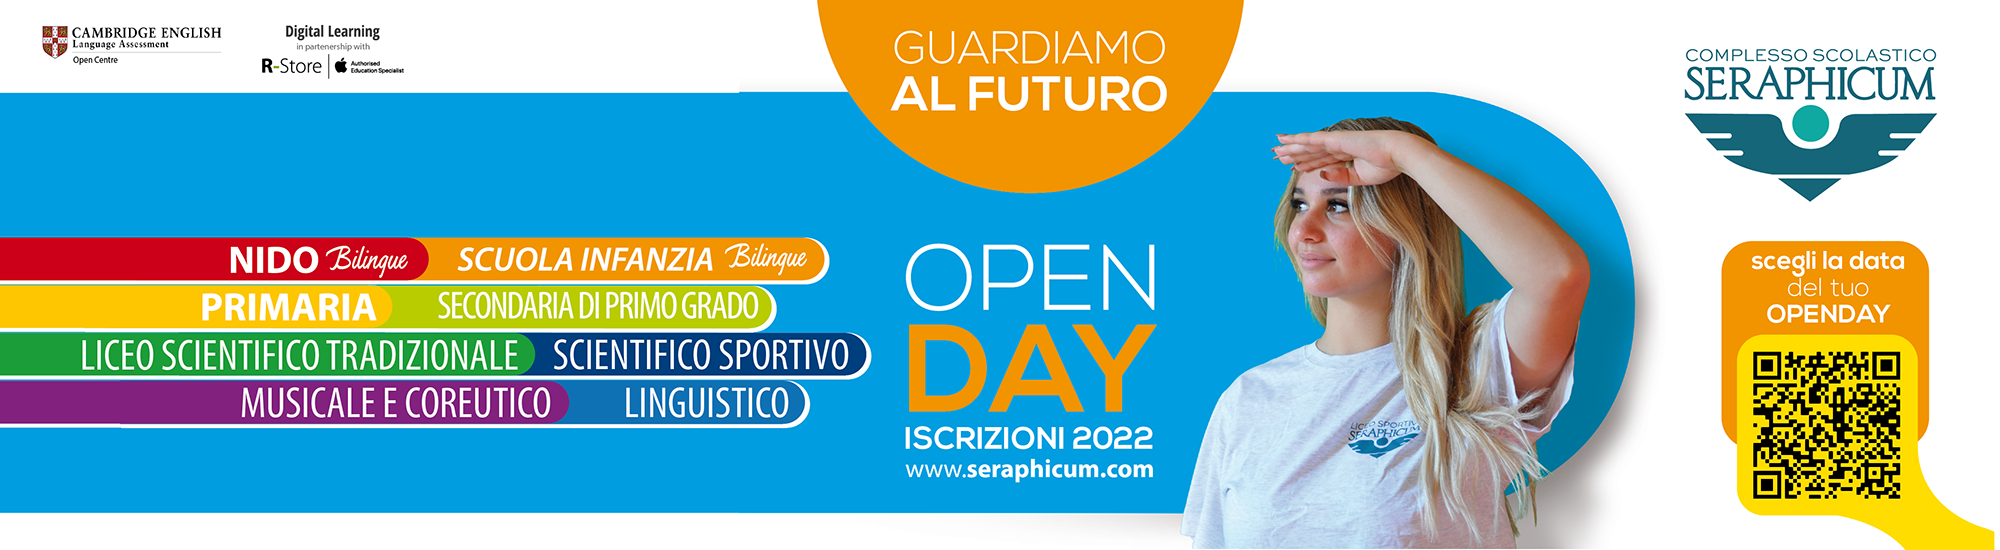 open-day-2022